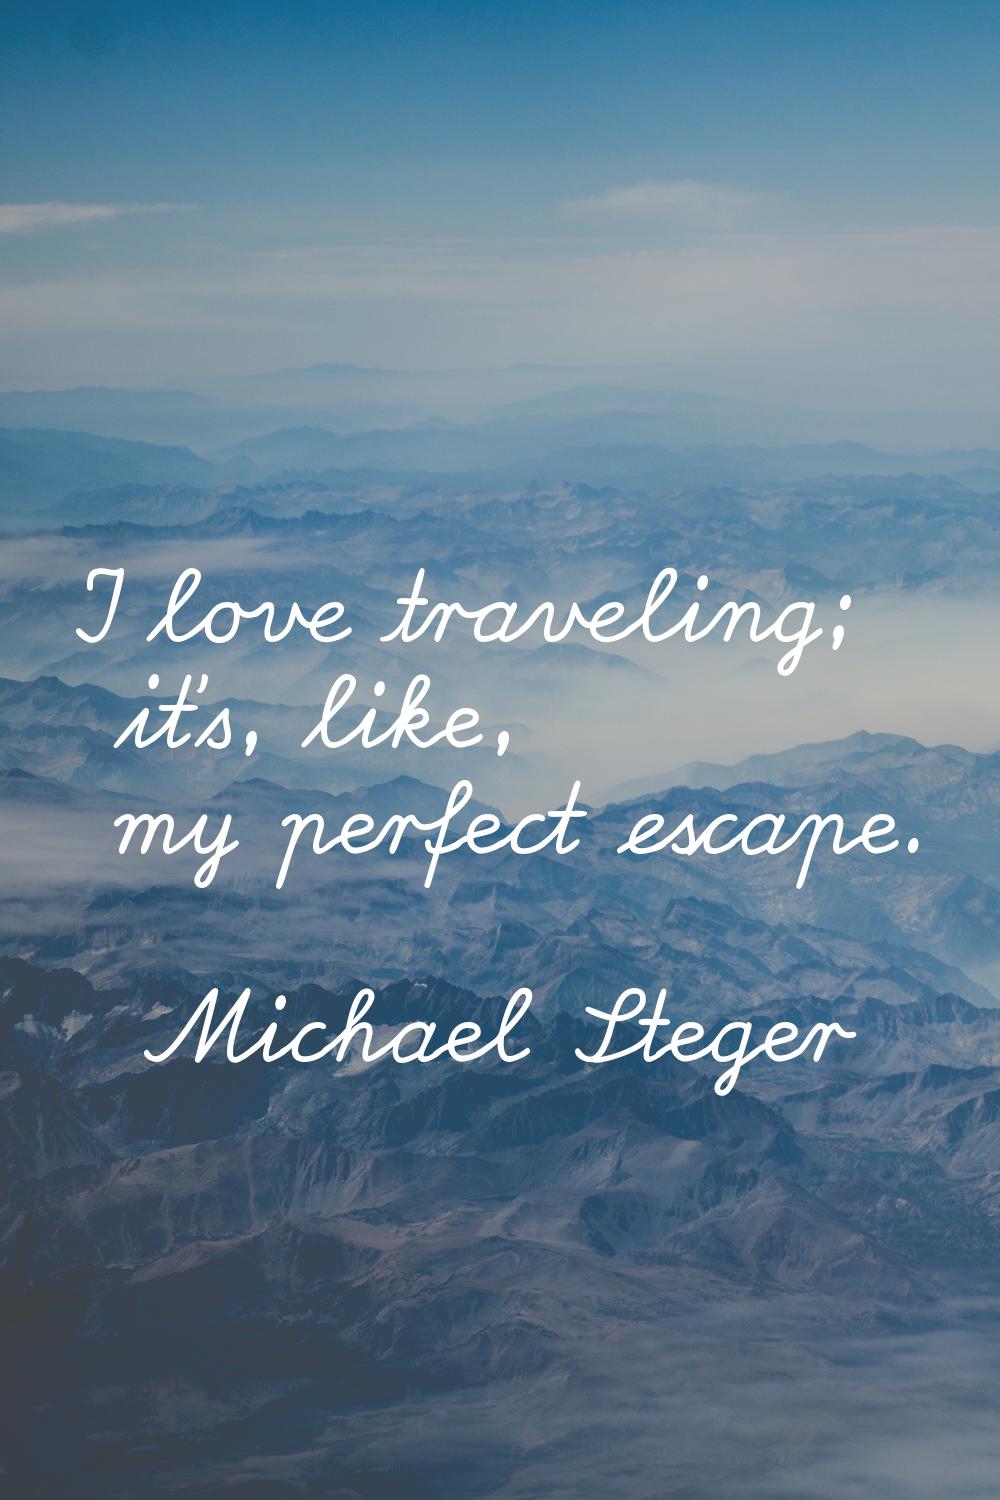 I love traveling; it's, like, my perfect escape.